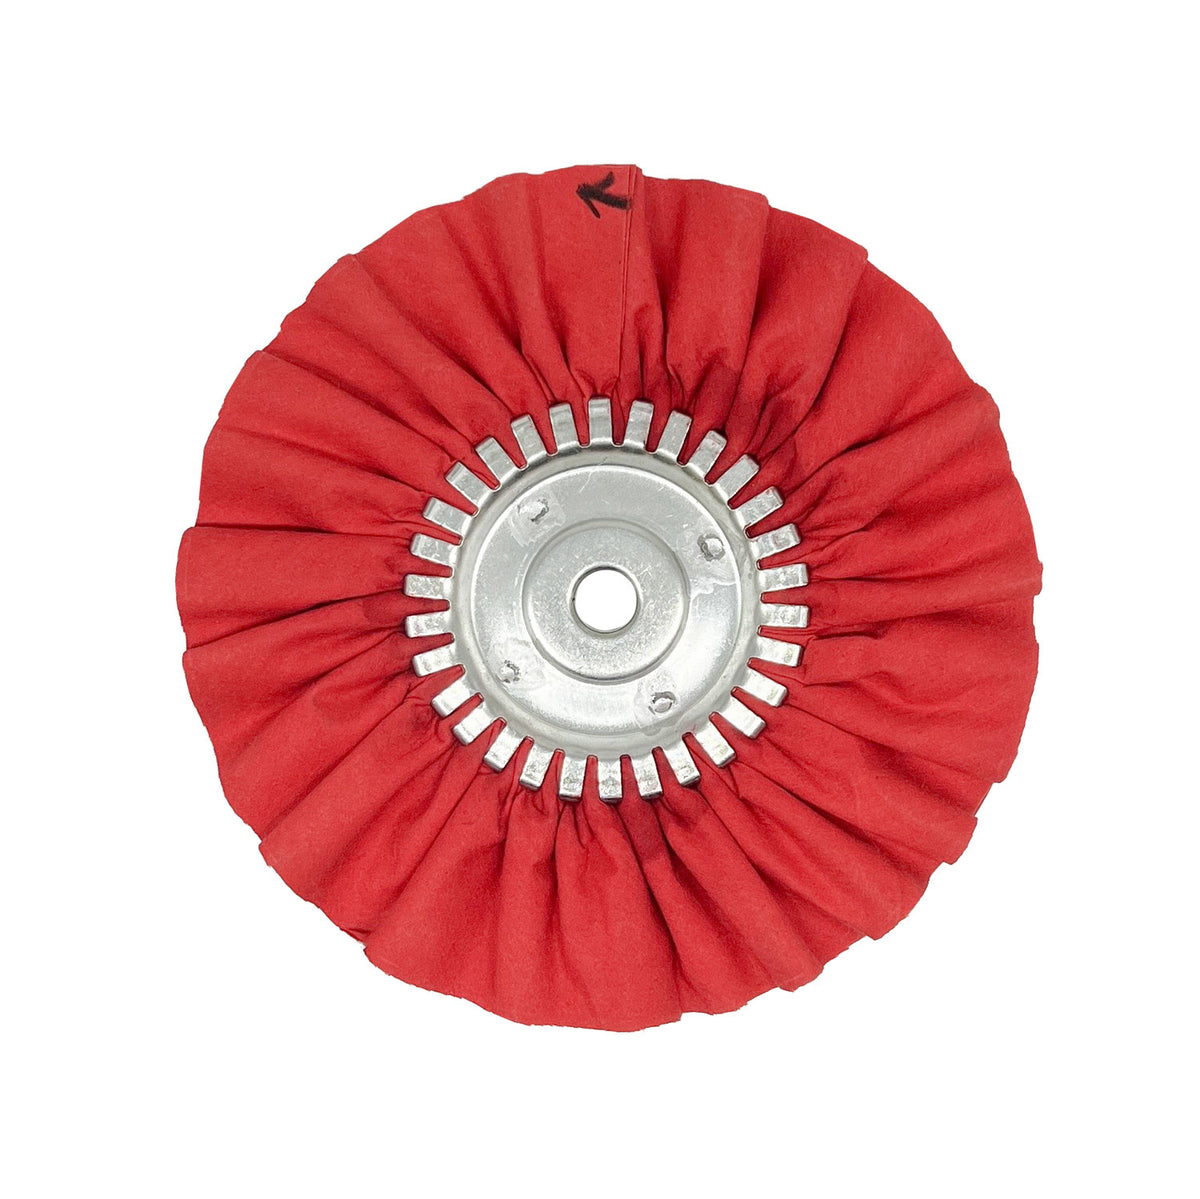 Renegade Products USA red airway buffing wheel with center plate, optimized for superior polishing and buffing results